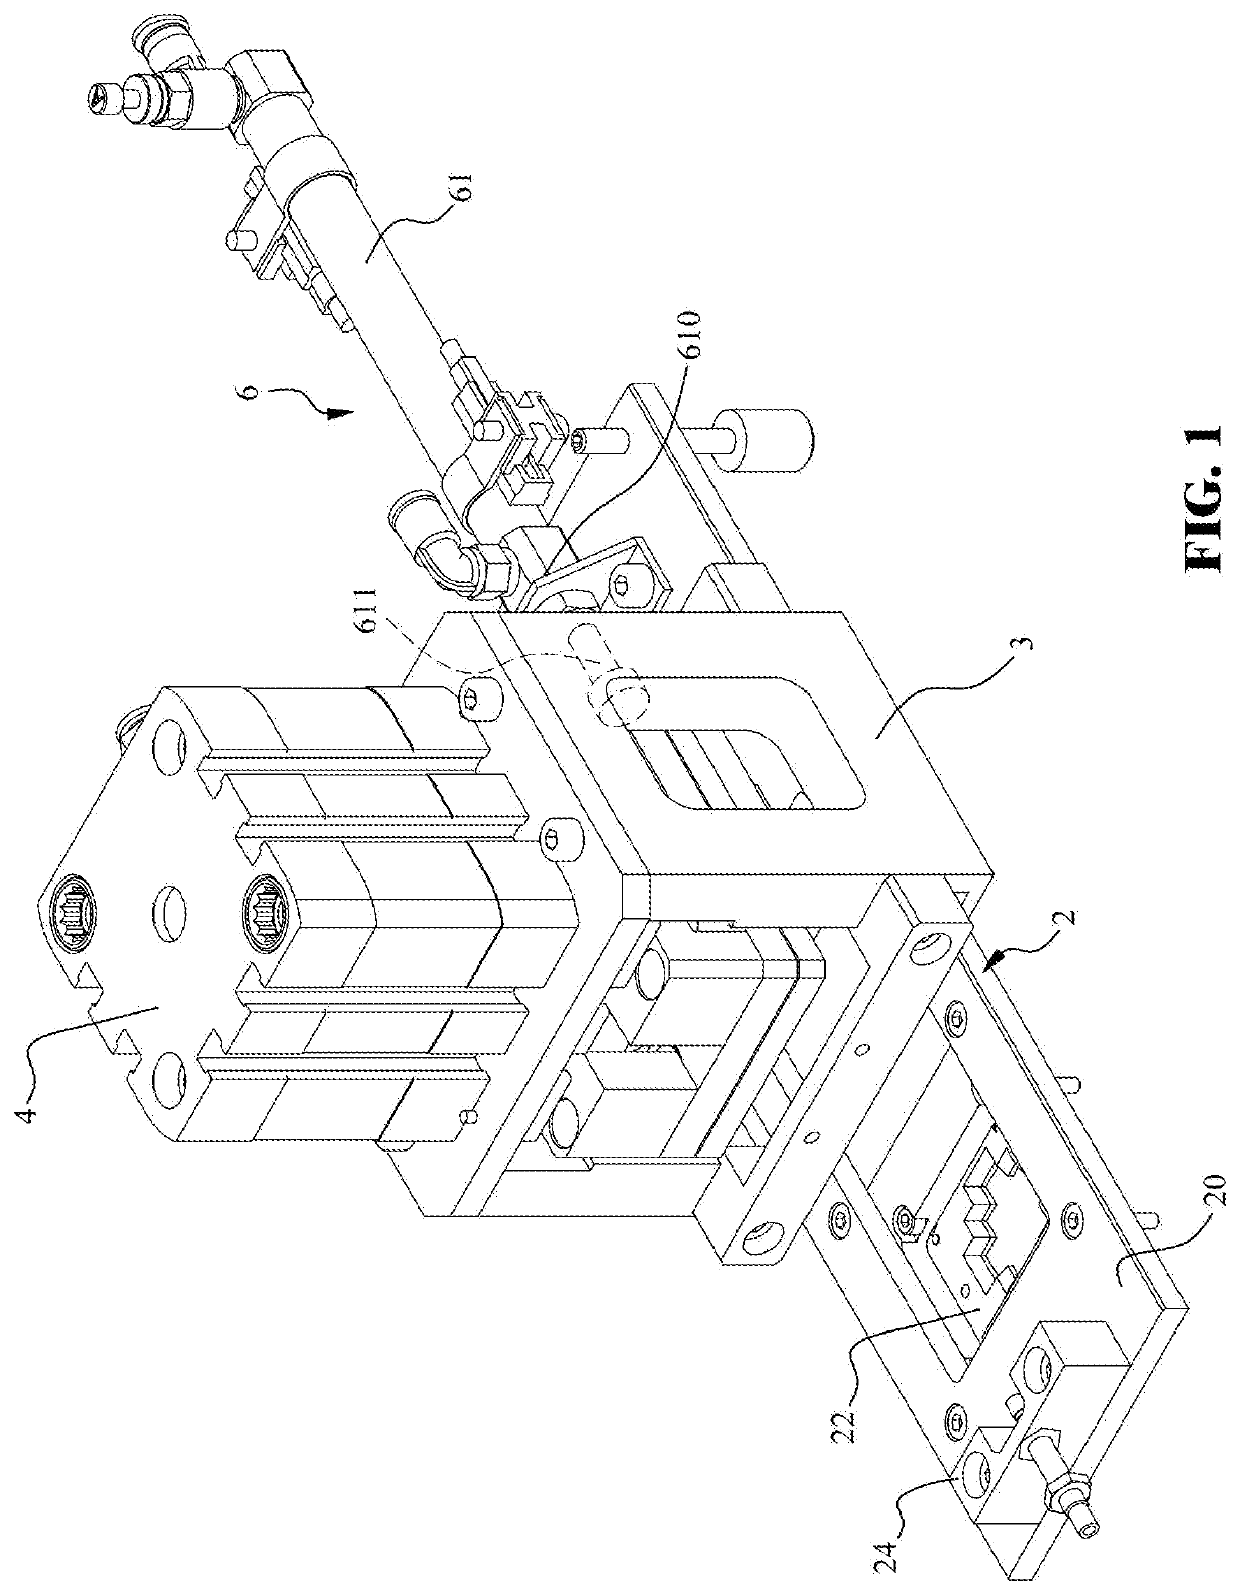 Sliding test device for electronic components